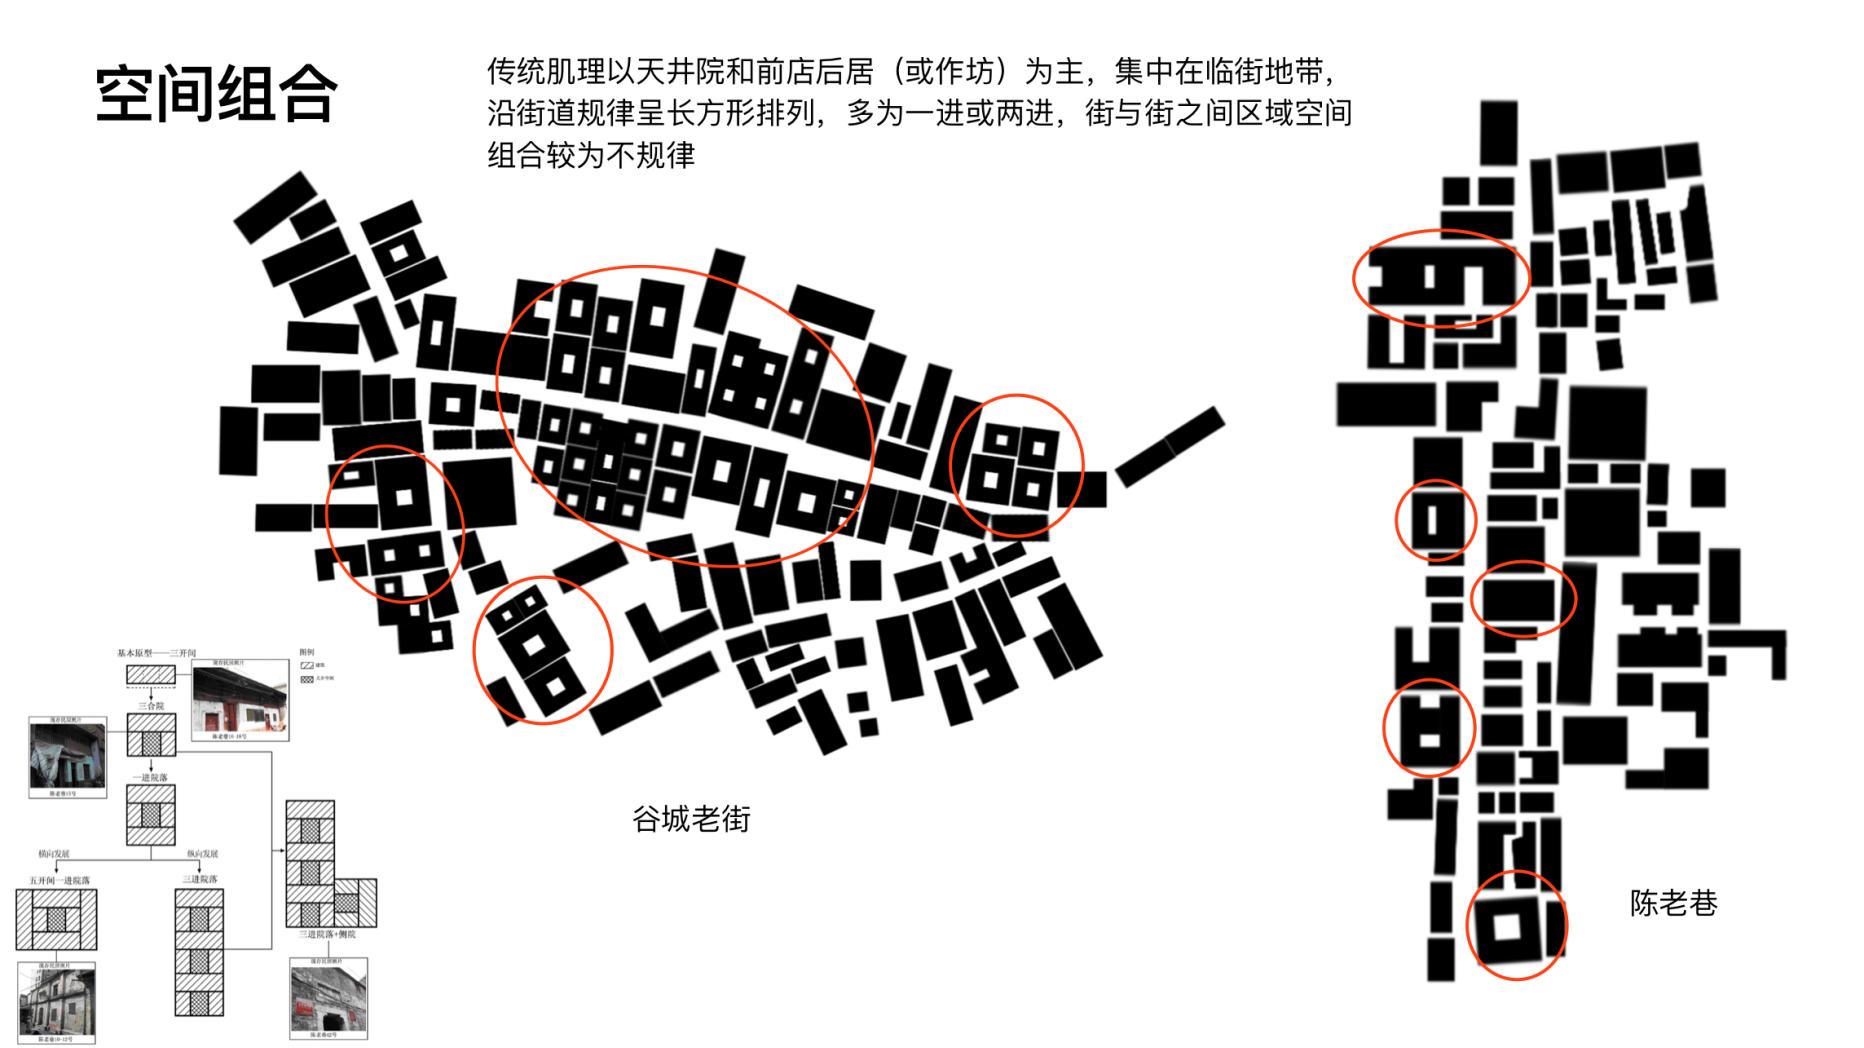 A page from my analysis of the urban space form of Xiangyang